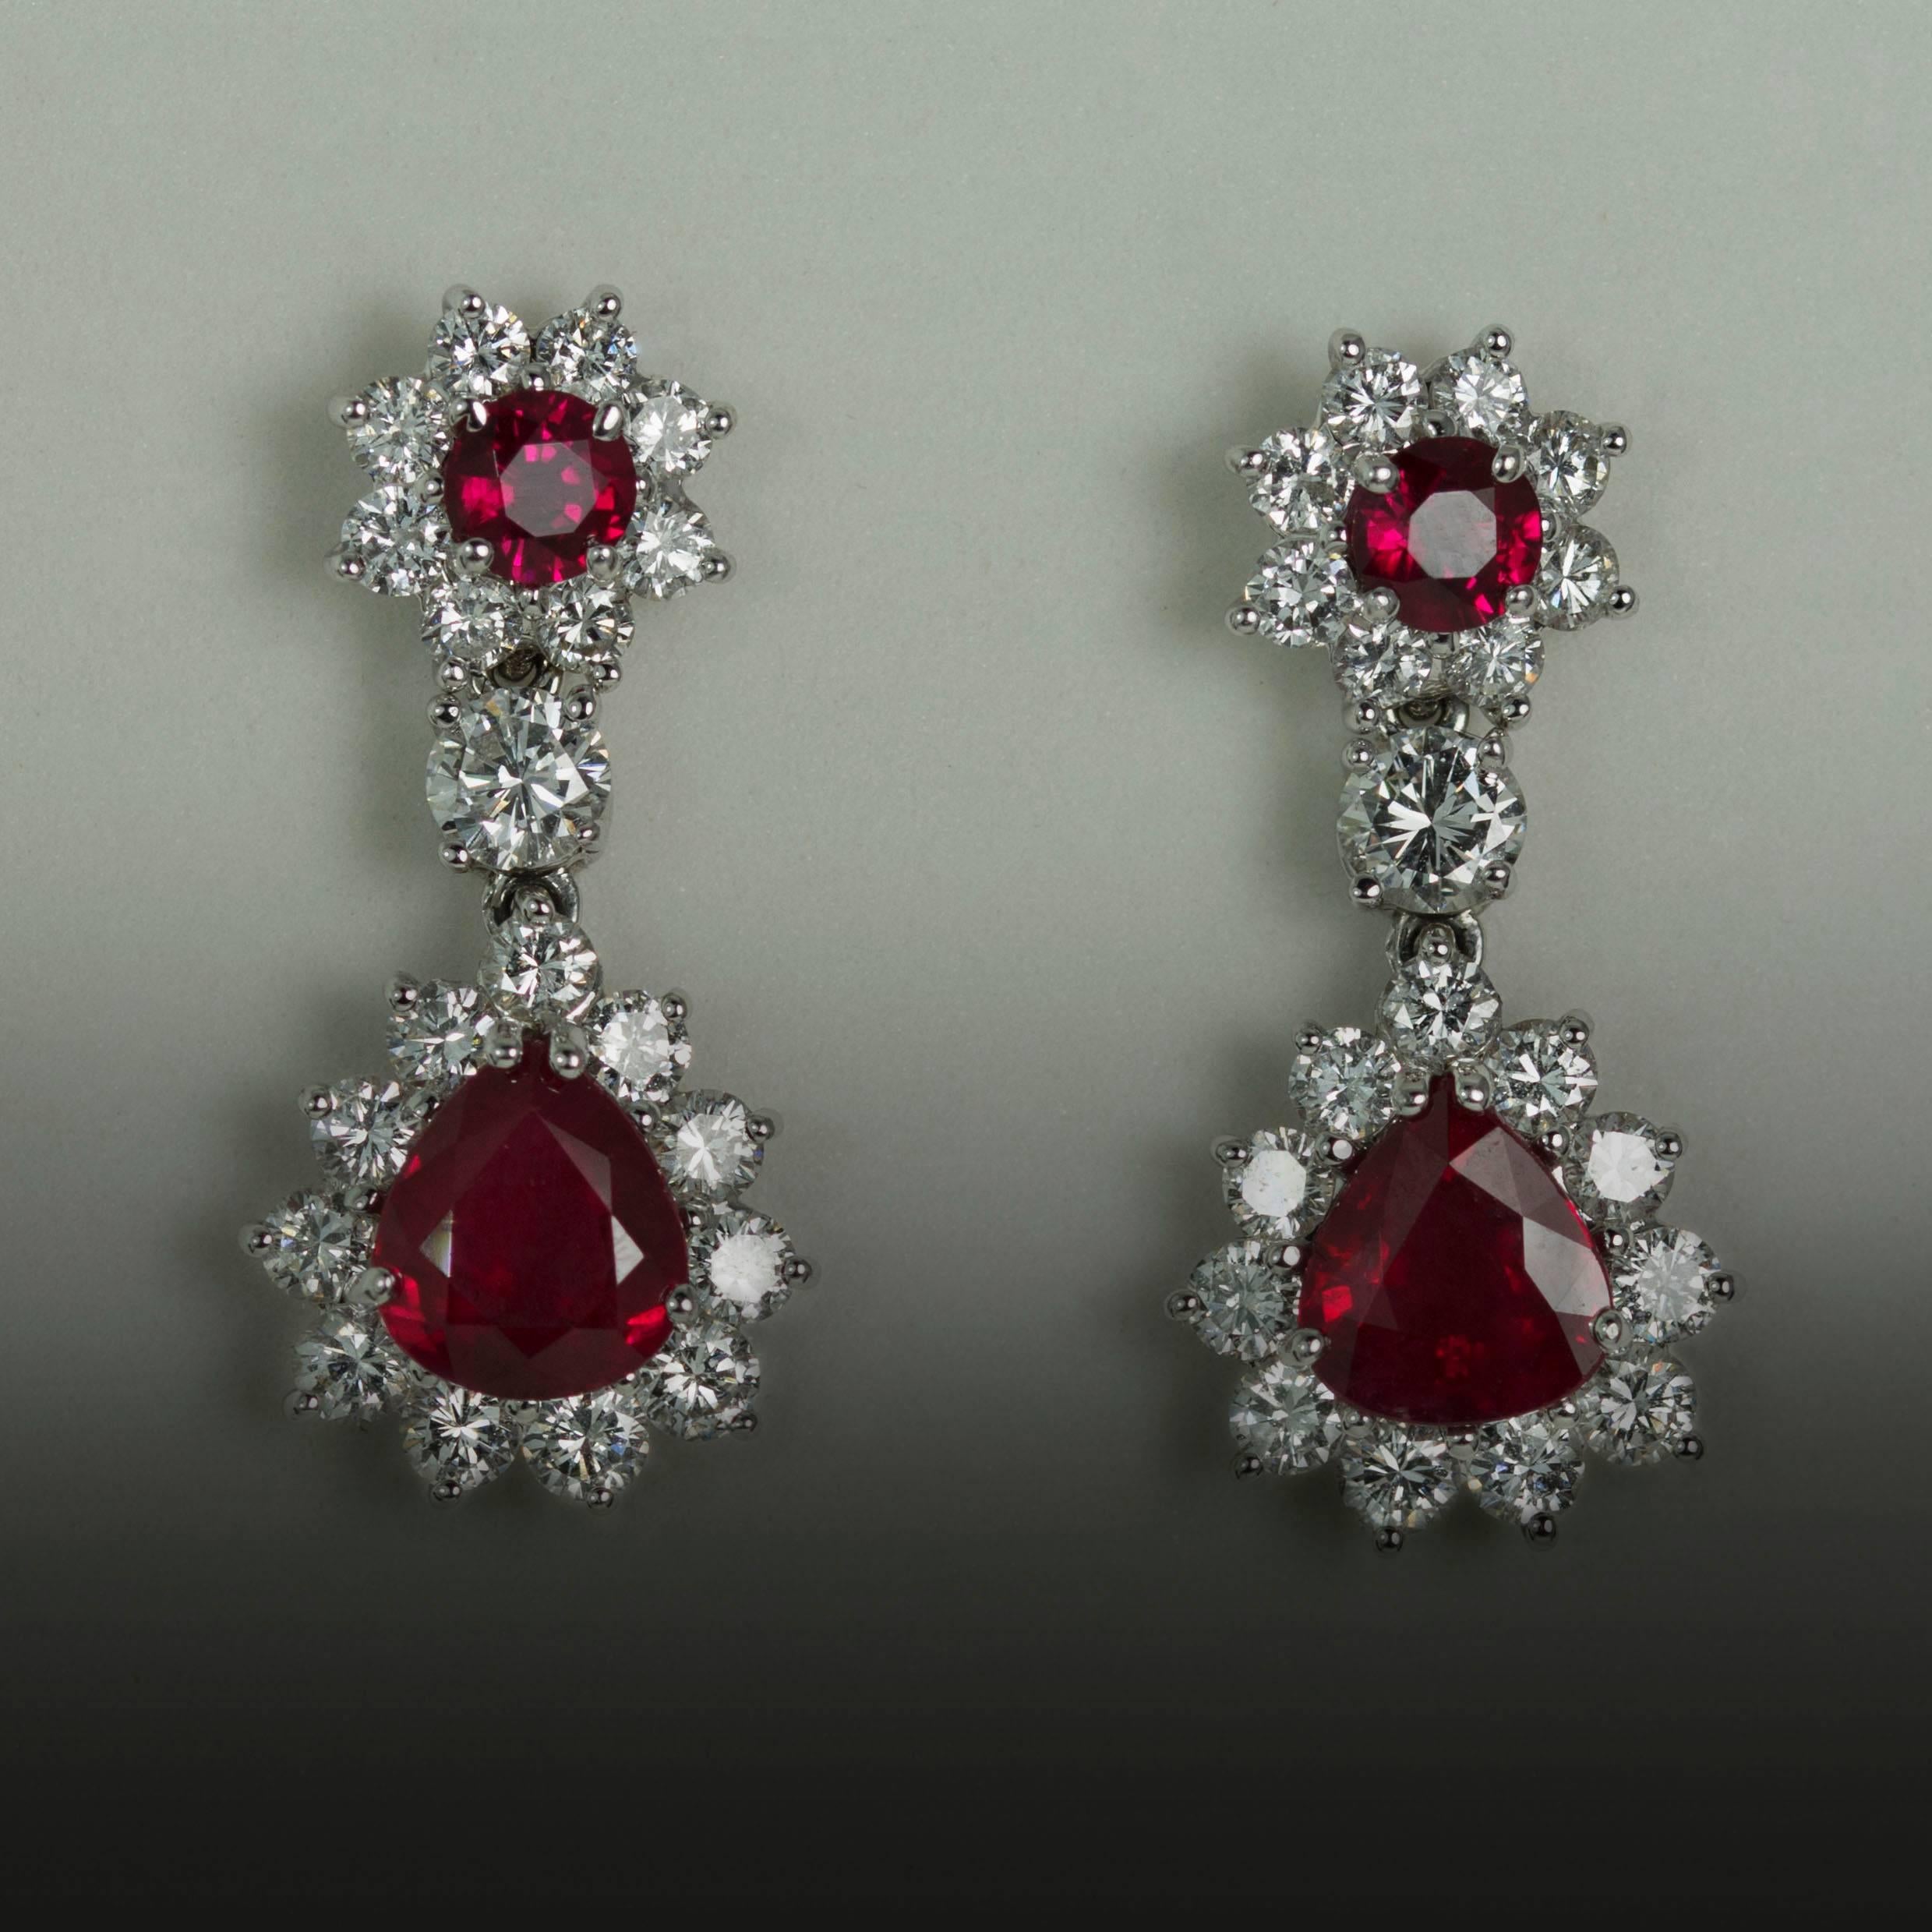 18K Earrings containing 2 natural pear shape rubies weighing 2.93 carats, 2 round rubies weighing 0.55 carats and 40 round brilliant diamonds weighing 2.36 carats.
 